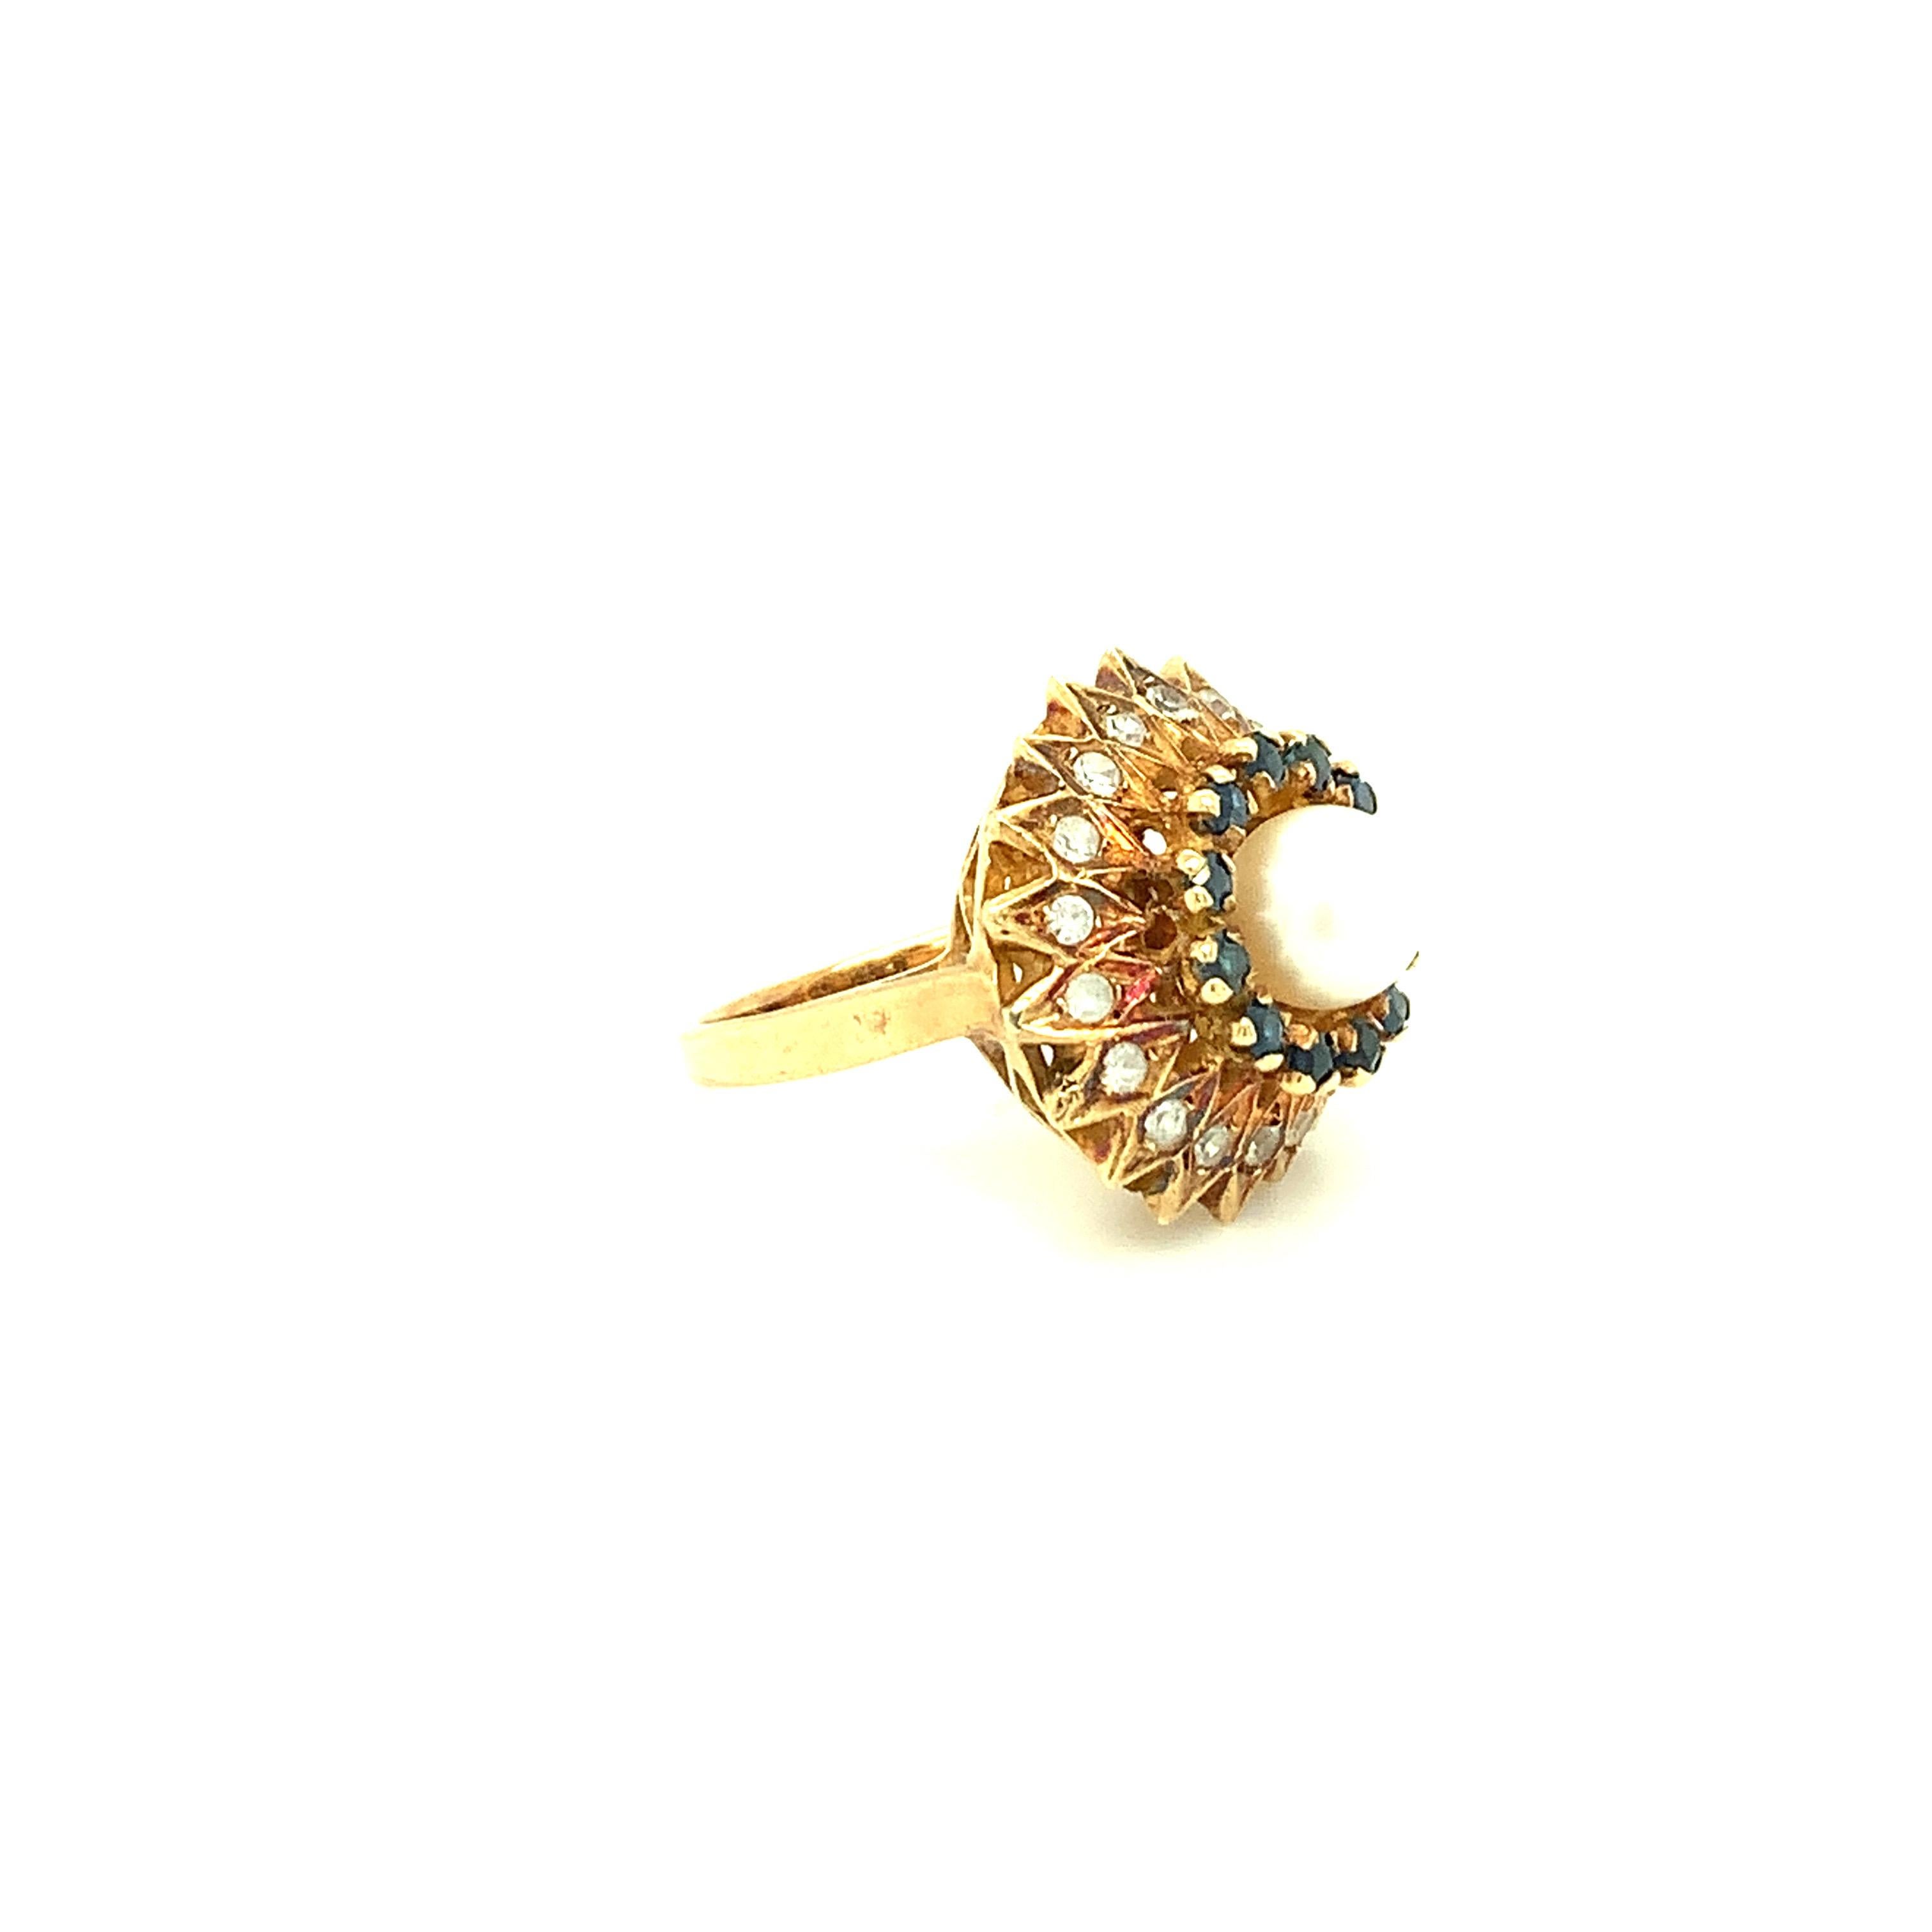 A keepsake to cherish, this pearl ring is a unique find. Cultured pearl artfully sits in the middle surrounded by blue sapphire and diamond on outer circle is crafted in 14K yellow gold.